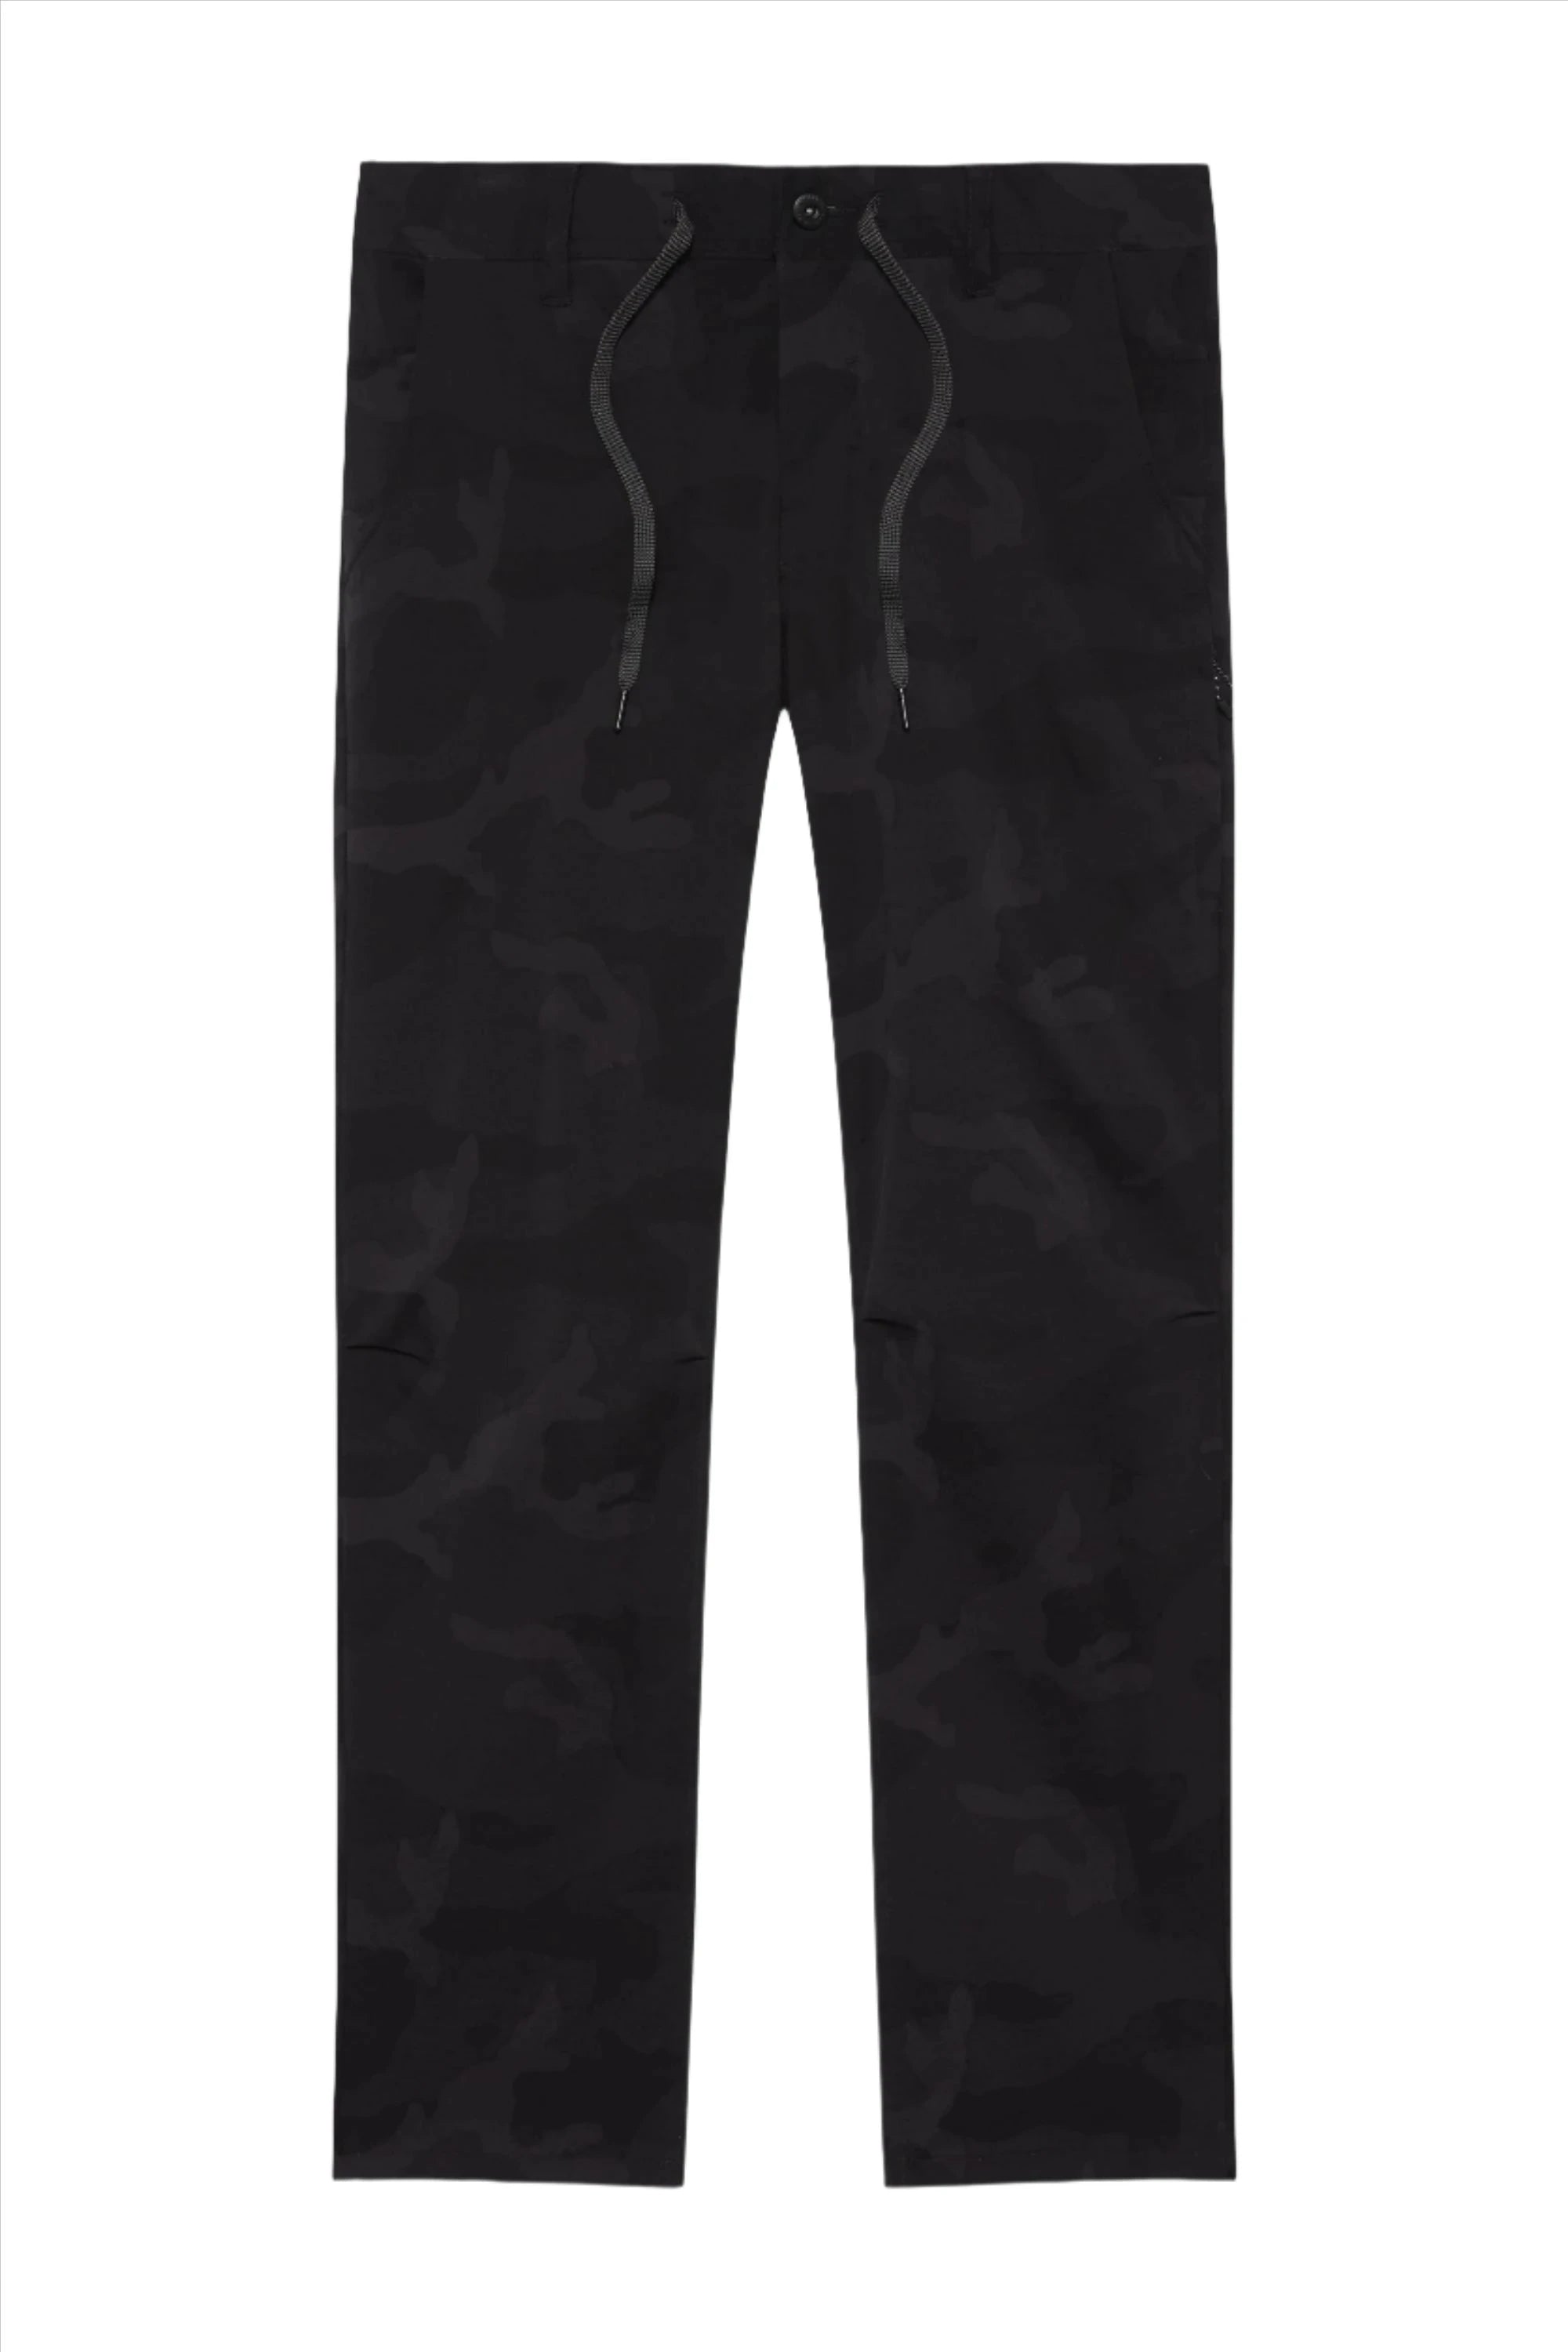 686 Everywhere Relax Fit Pant Black Camo